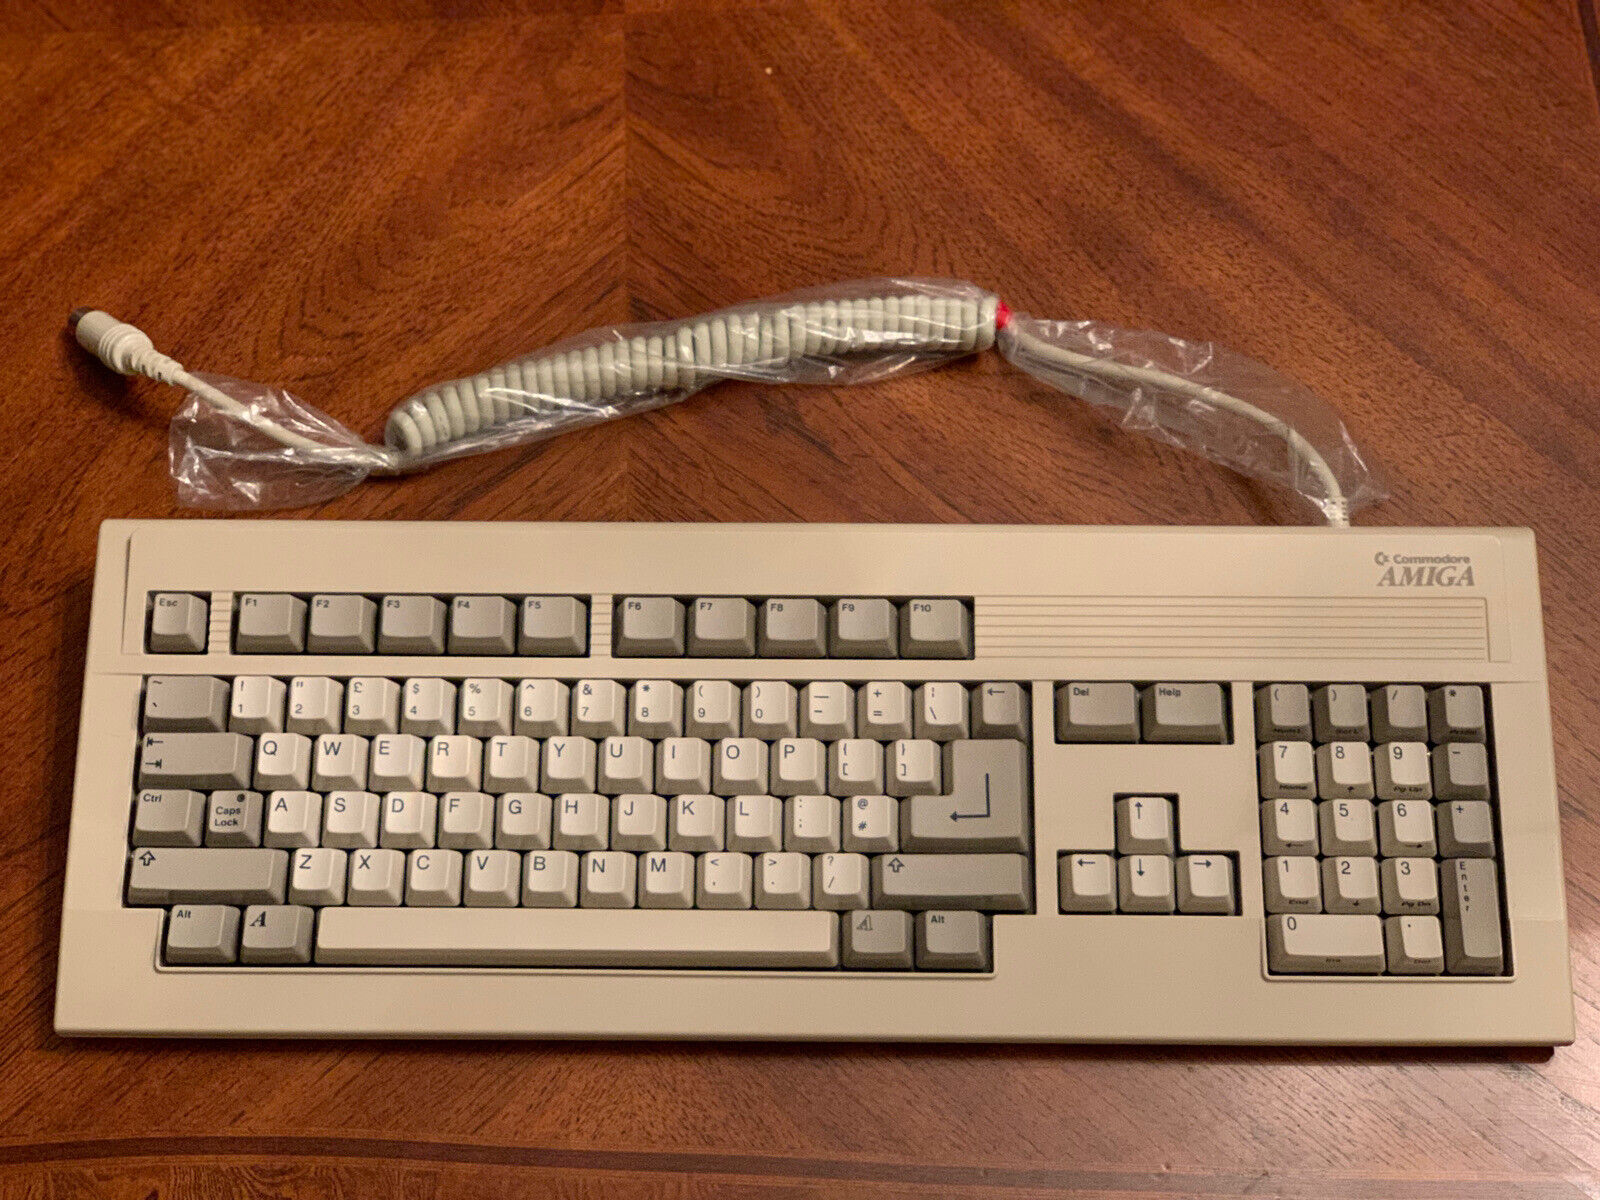 NEW OLD STOCK Commodore Amiga A3000 Keyboard QWERTY - RARE A2500 A2000 Computer